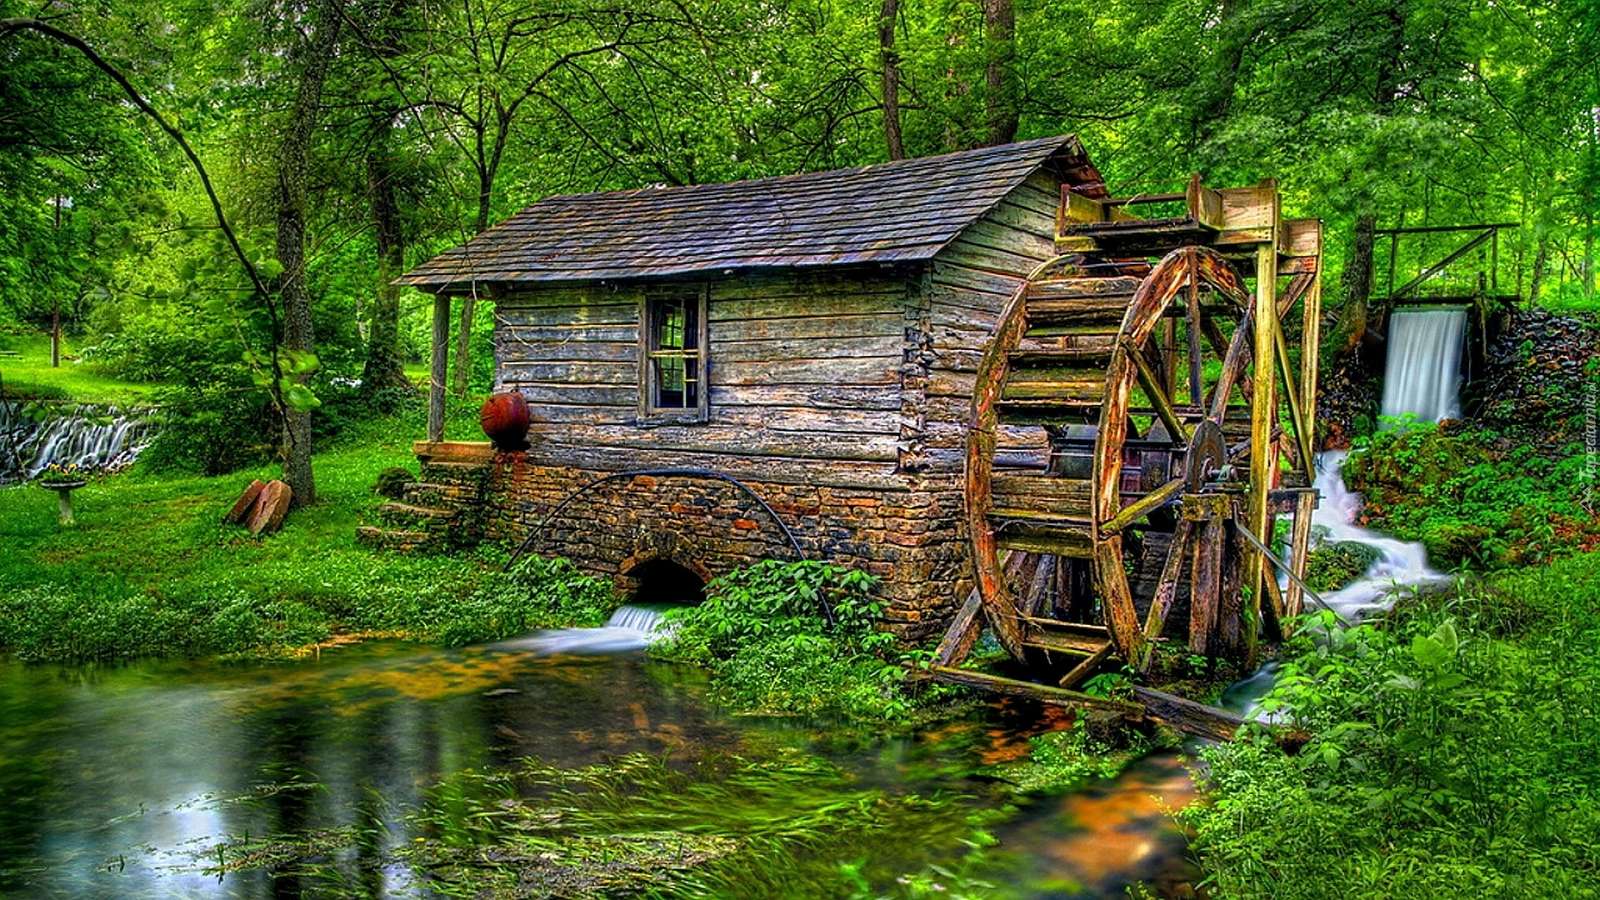 Mill wheel above the stream jigsaw puzzle online